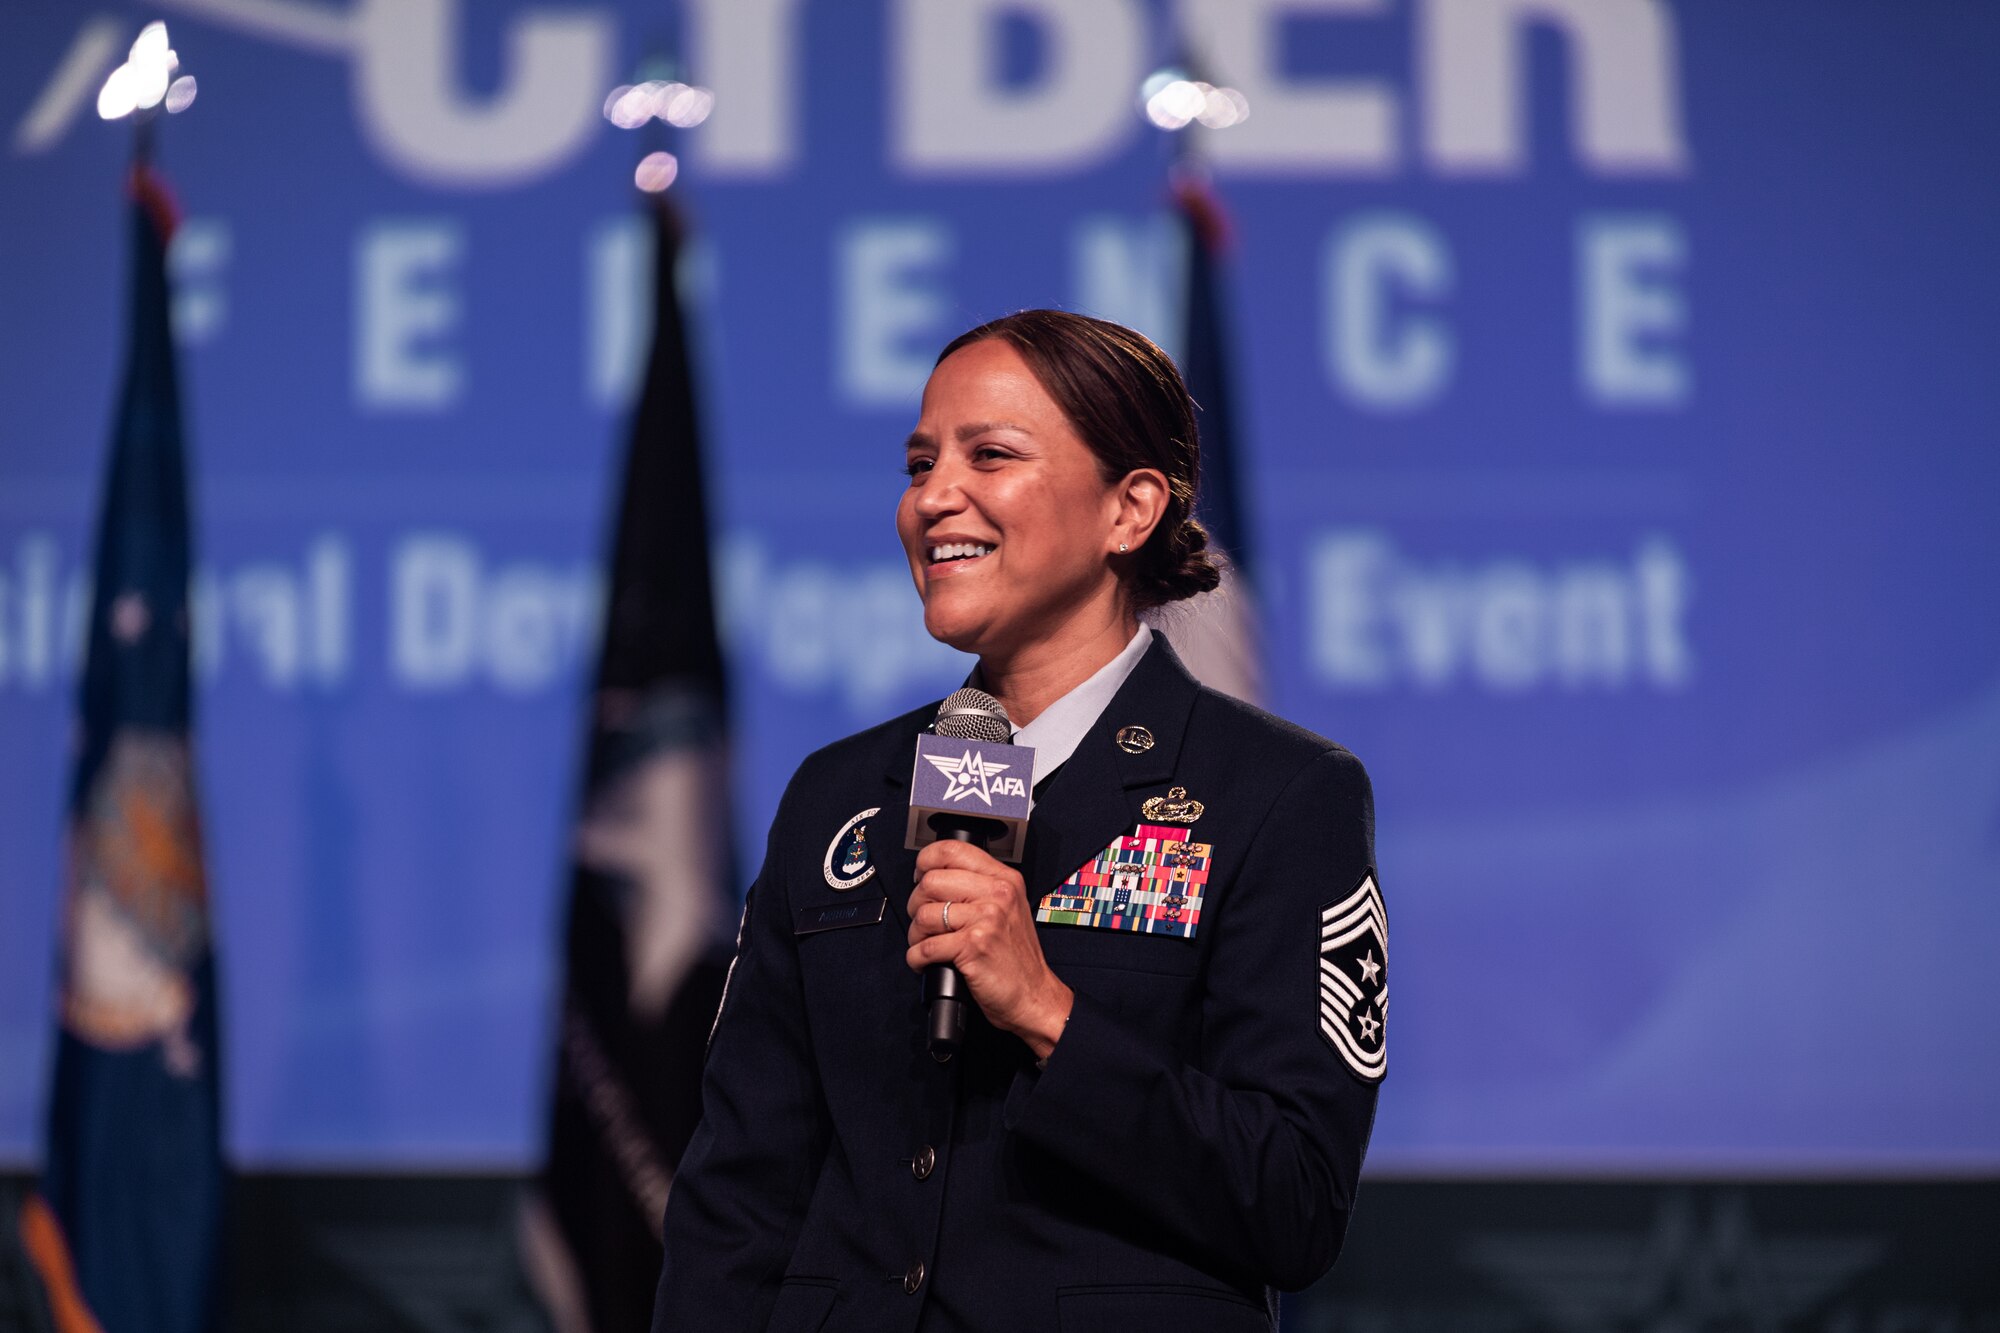 U.S. Air Force Command Chief Master Sgt. Rebecca Arbona, Air Force Recruiting Service senior enslited leader, makes remarks at the Air and Space Forces Association's Air, Space & Cyber Conference in National Harbor, Md., Sept. 11, 2023.